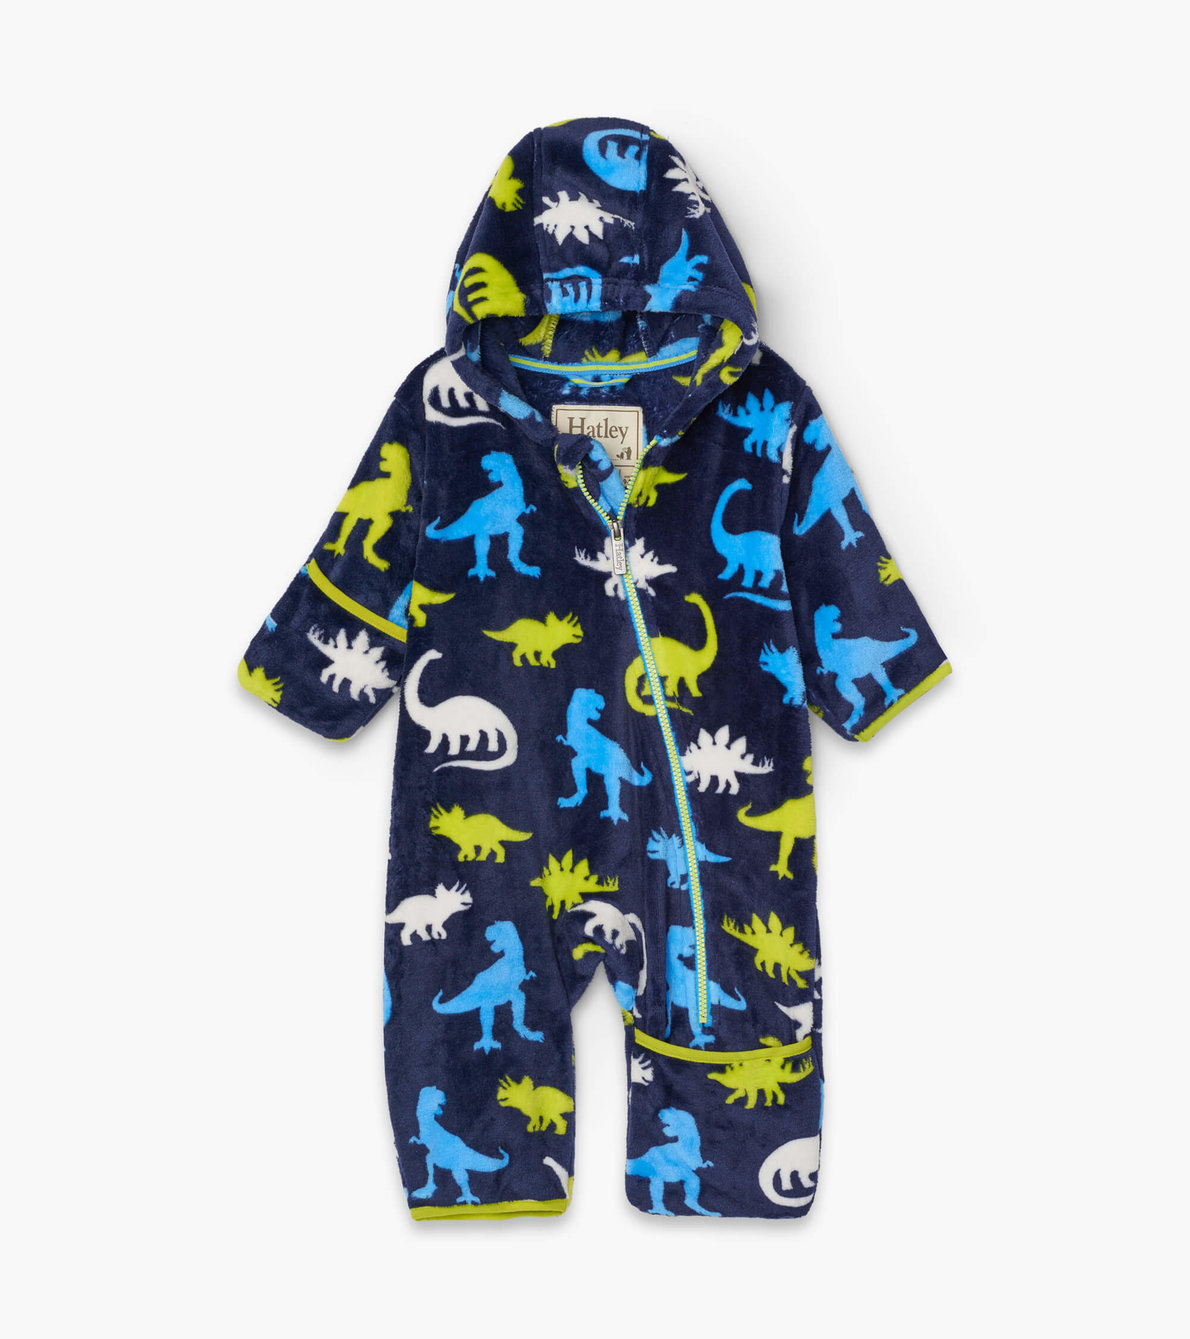 View larger image of Silhouette Dinos Fuzzy Fleece Baby Bundler